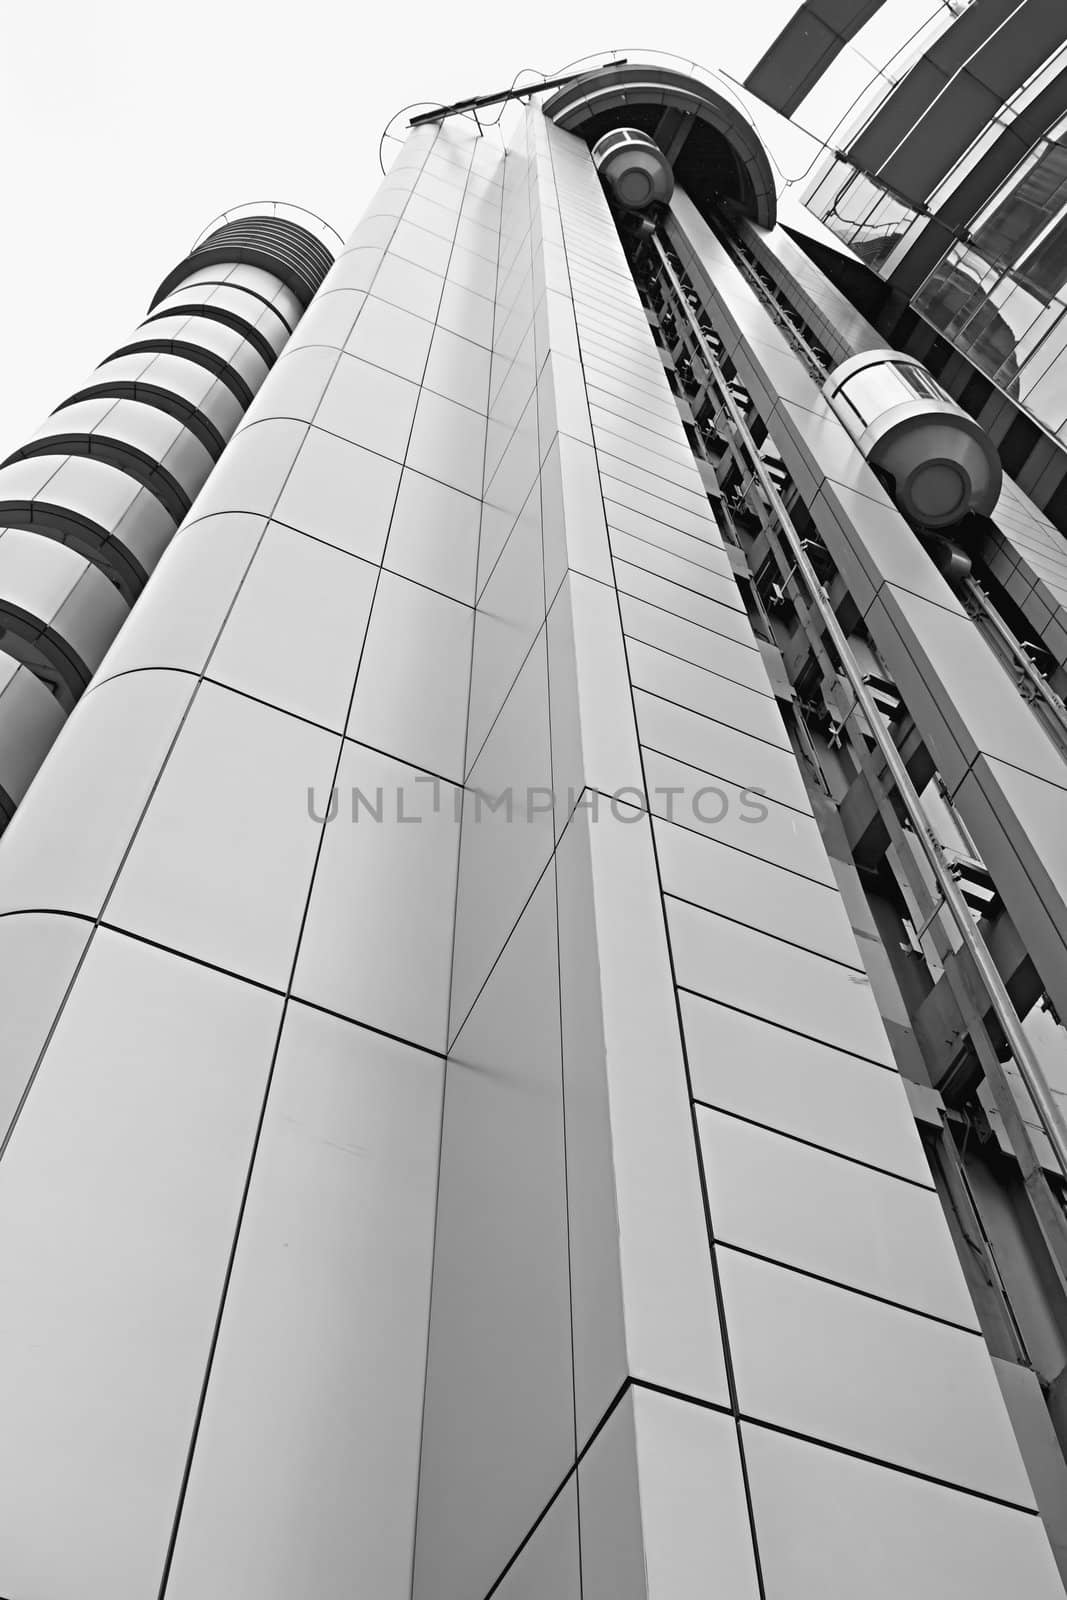 Architectural Exterior Detail of Factory Building with Elevator Perspective